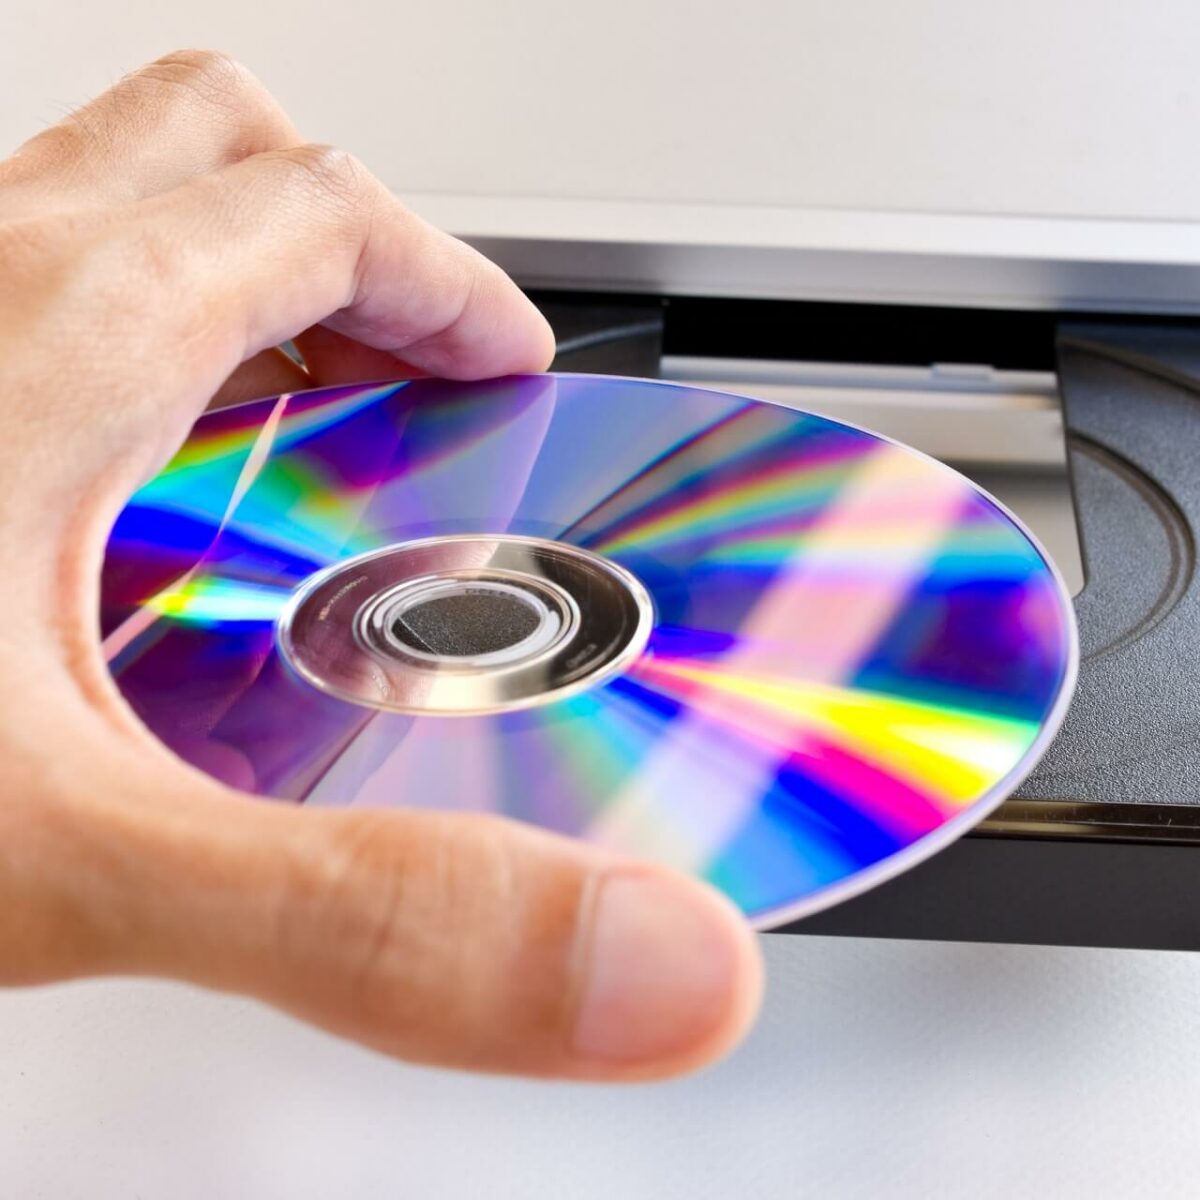 how to copy dvd to computer windows 10